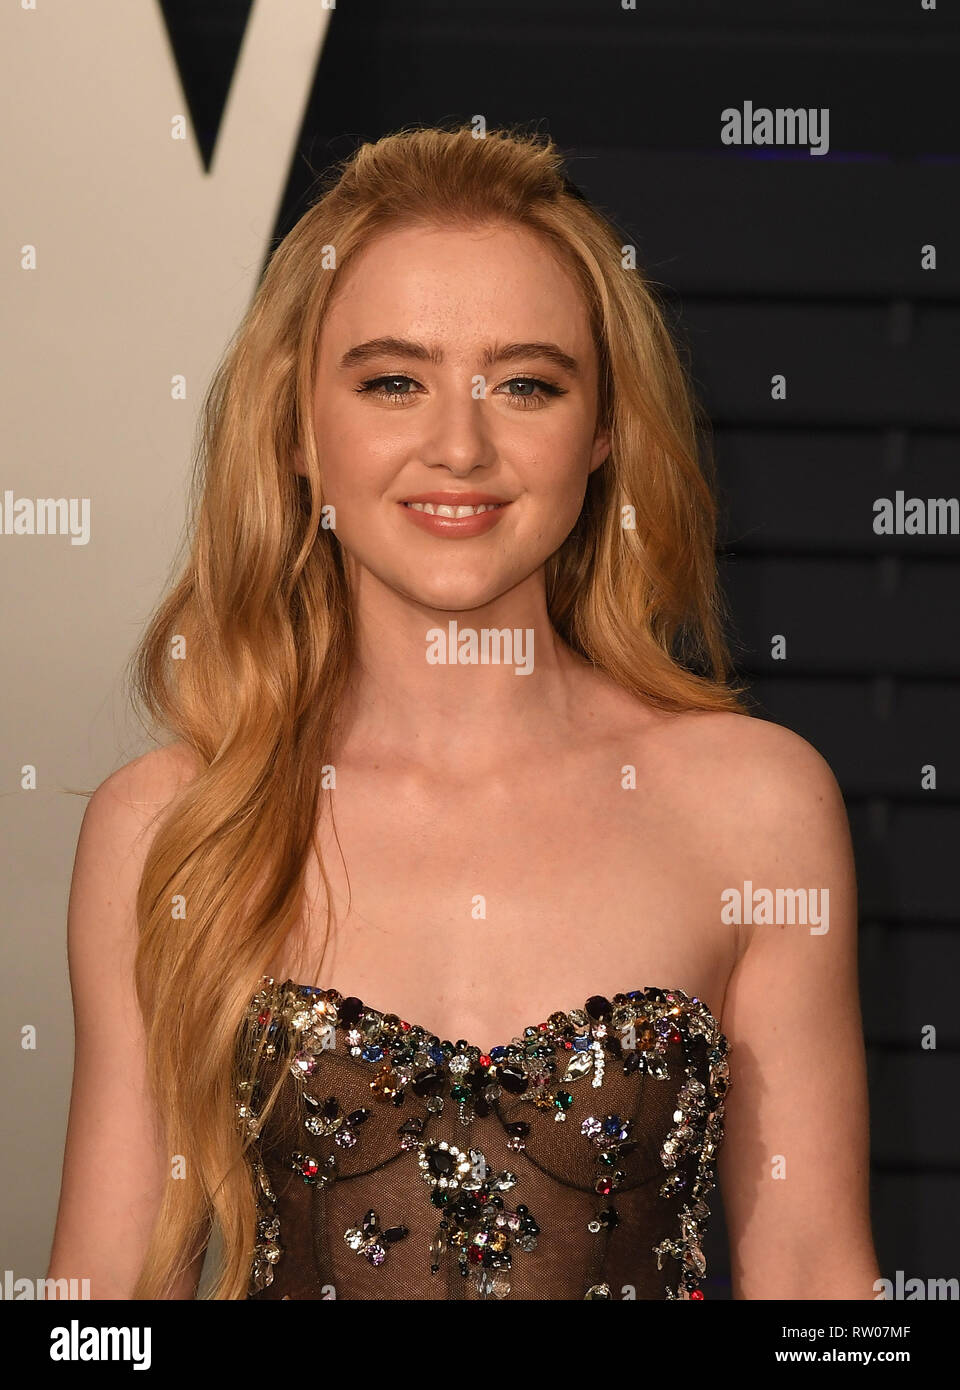 BEVERLY HILLS, CALIFORNIA - FEBRUARY 24: Kathryn Newton attends 2019 Vanity Fair Oscar Party at Wallis Annenberg Center for the Performing Arts on Feb Stock Photo